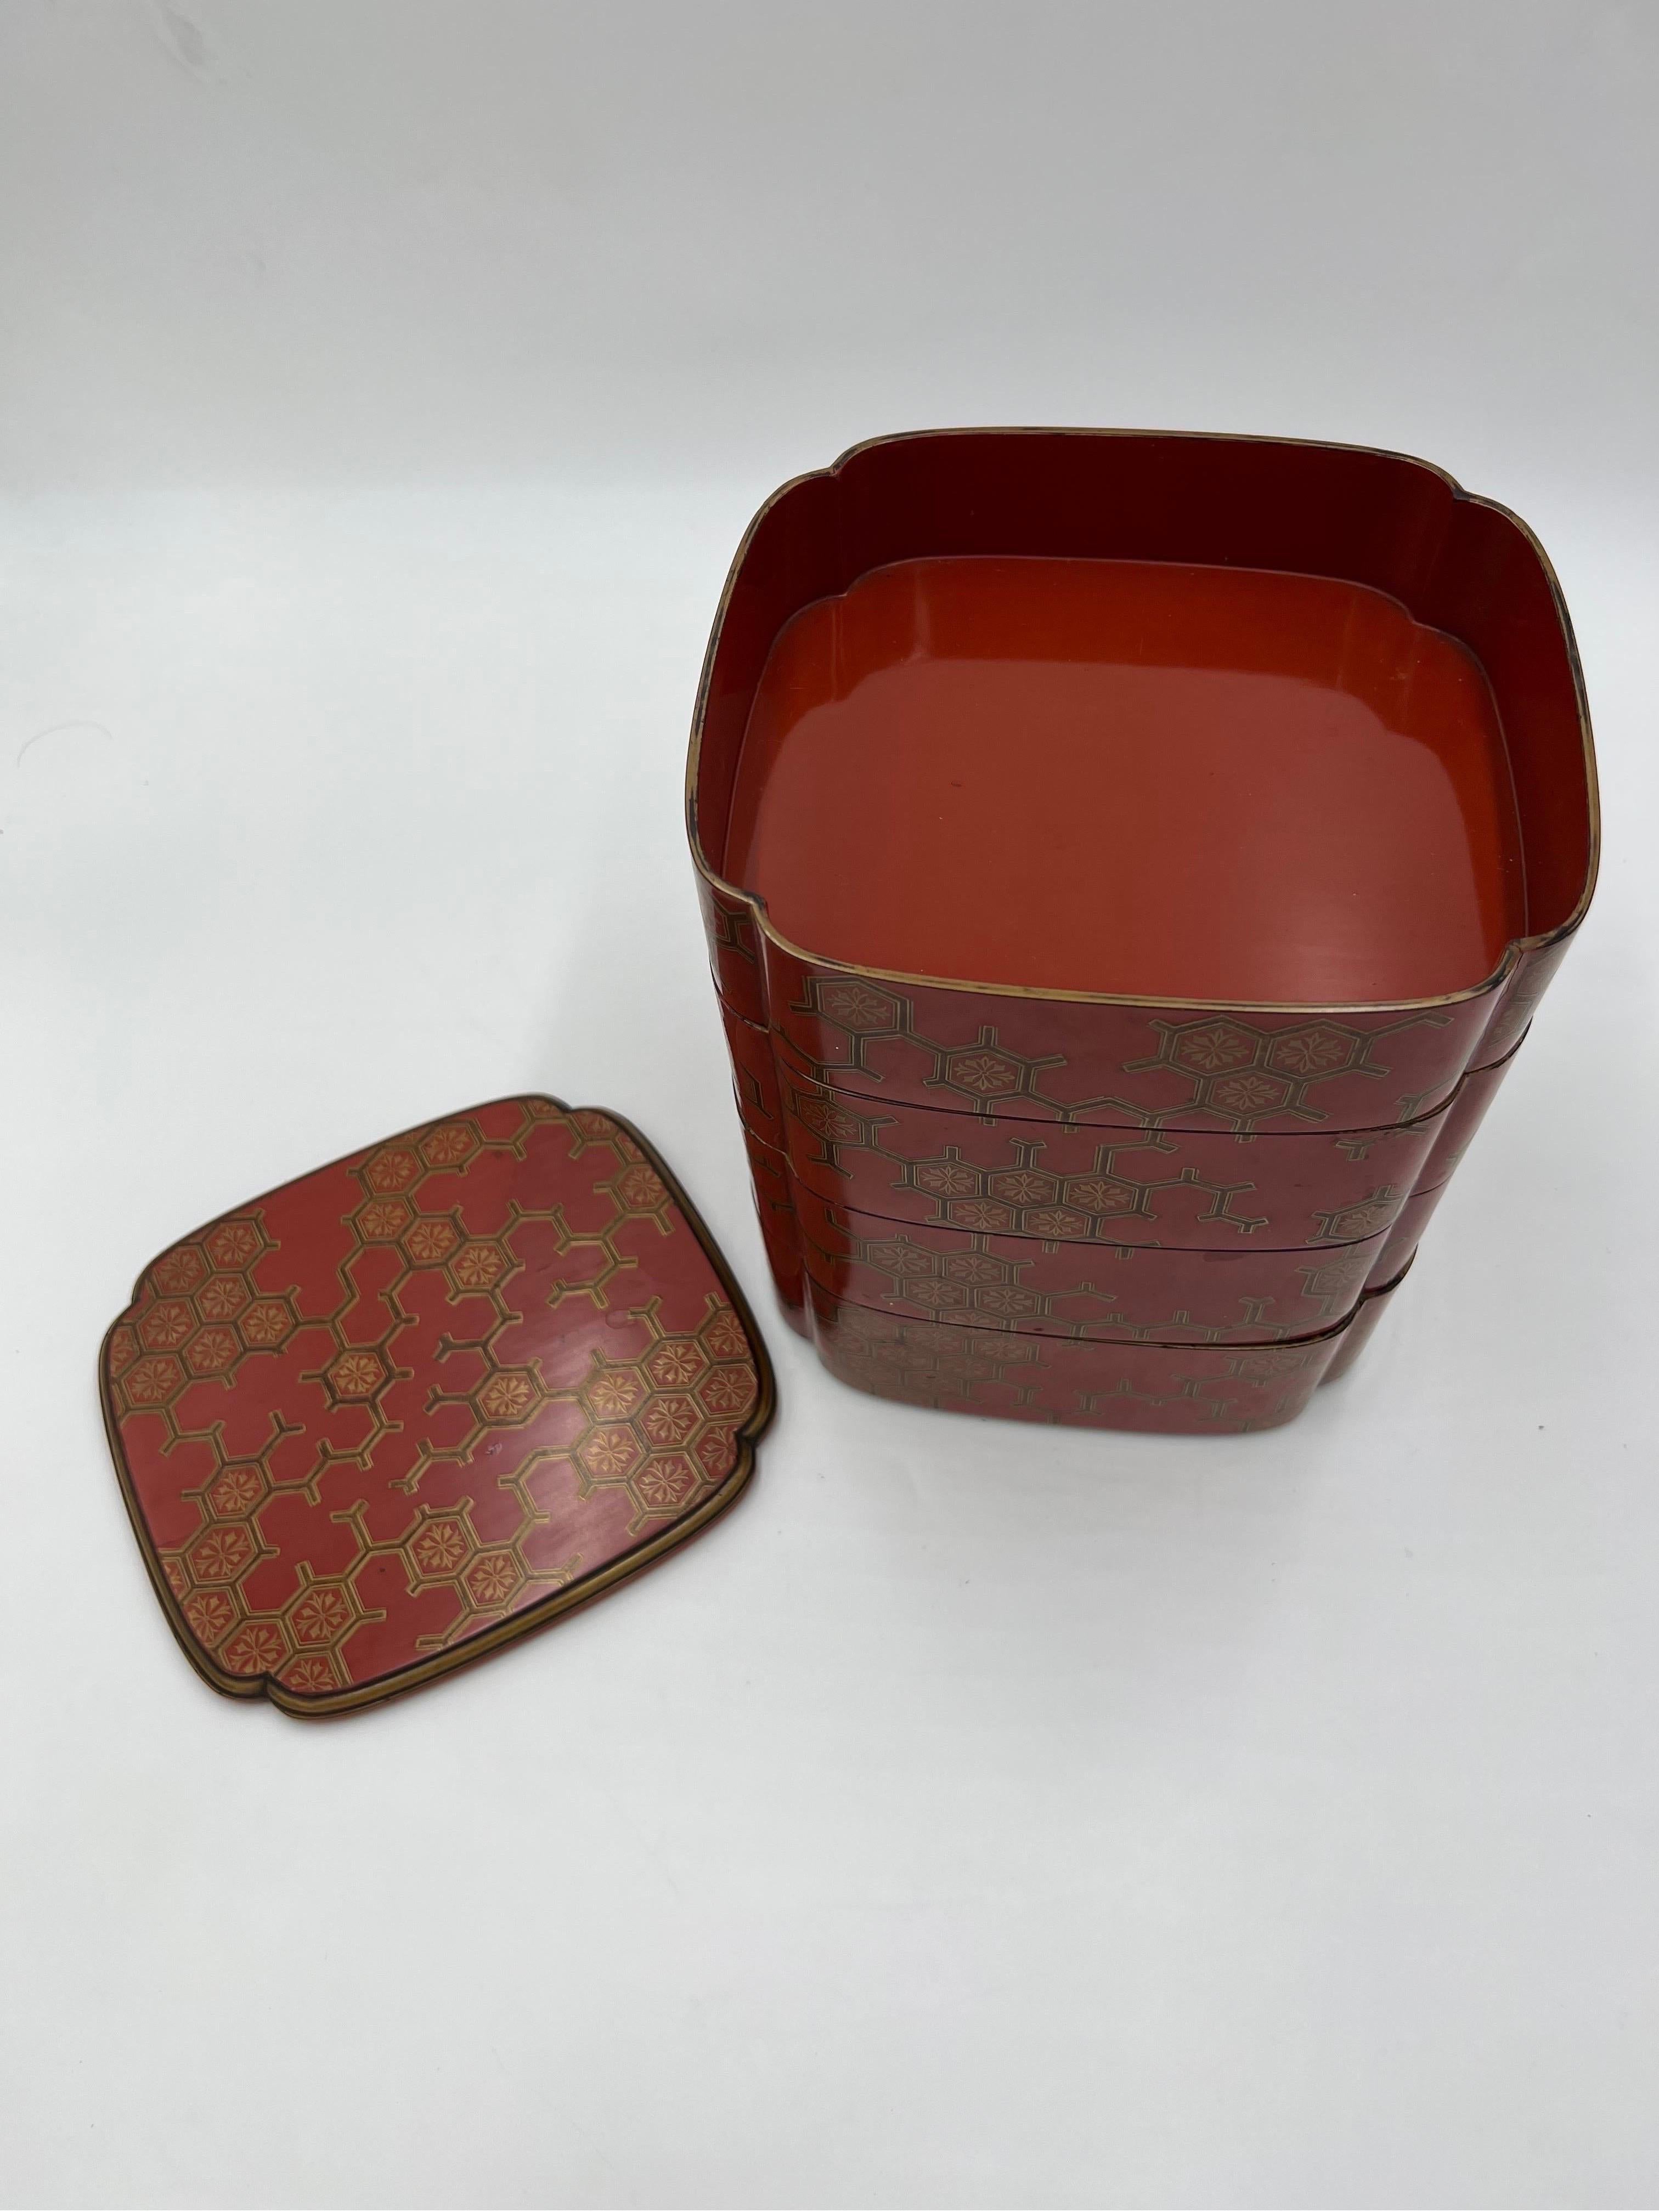 Antique Japanese Jubako 4-Tiered Bento Red Lacquerware Box For Sale 1